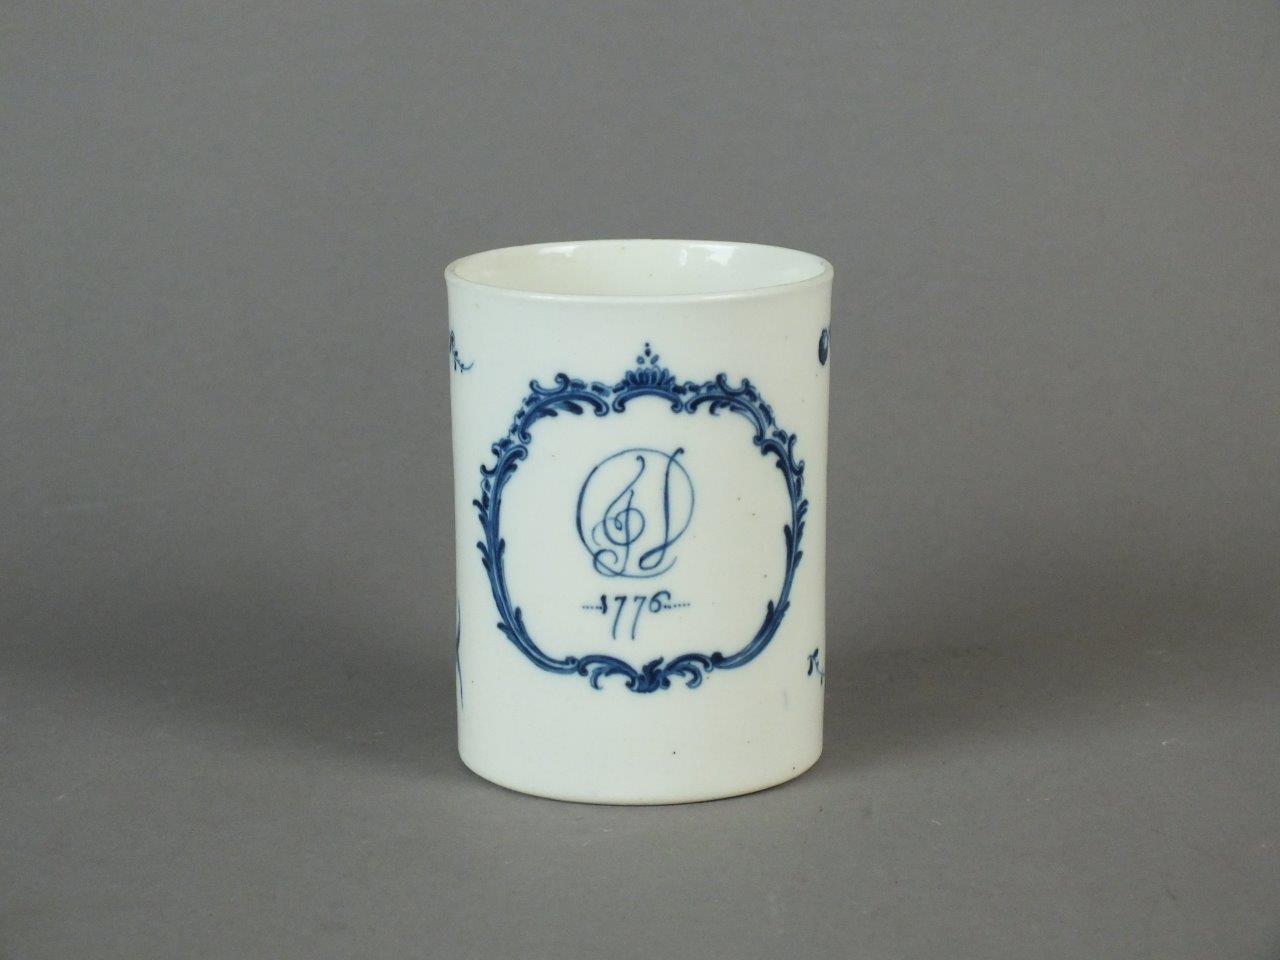 Lot 178 (The Autumn Auction, 16th September 2020)  A rare and early Caughley monogrammed and dated mug A rare and early Caughley monogrammed mug dated 1776 painted in blue with fruit sprays, an elaborate scroll cartouche enclosing a musical treble clef and the initials 'CD', crescent with serif mark, 8.5cm high  Hitherto unrecorded, this mug forms part of a small collection of pieces dated 1776, which is the earliest known date to be inscribed on Caughley. A similar example sold at these rooms as part of Maurice Wright's Collection in April 2017 and the painted date on both mugs can be attributed to the same hand.  Sold for £3,600